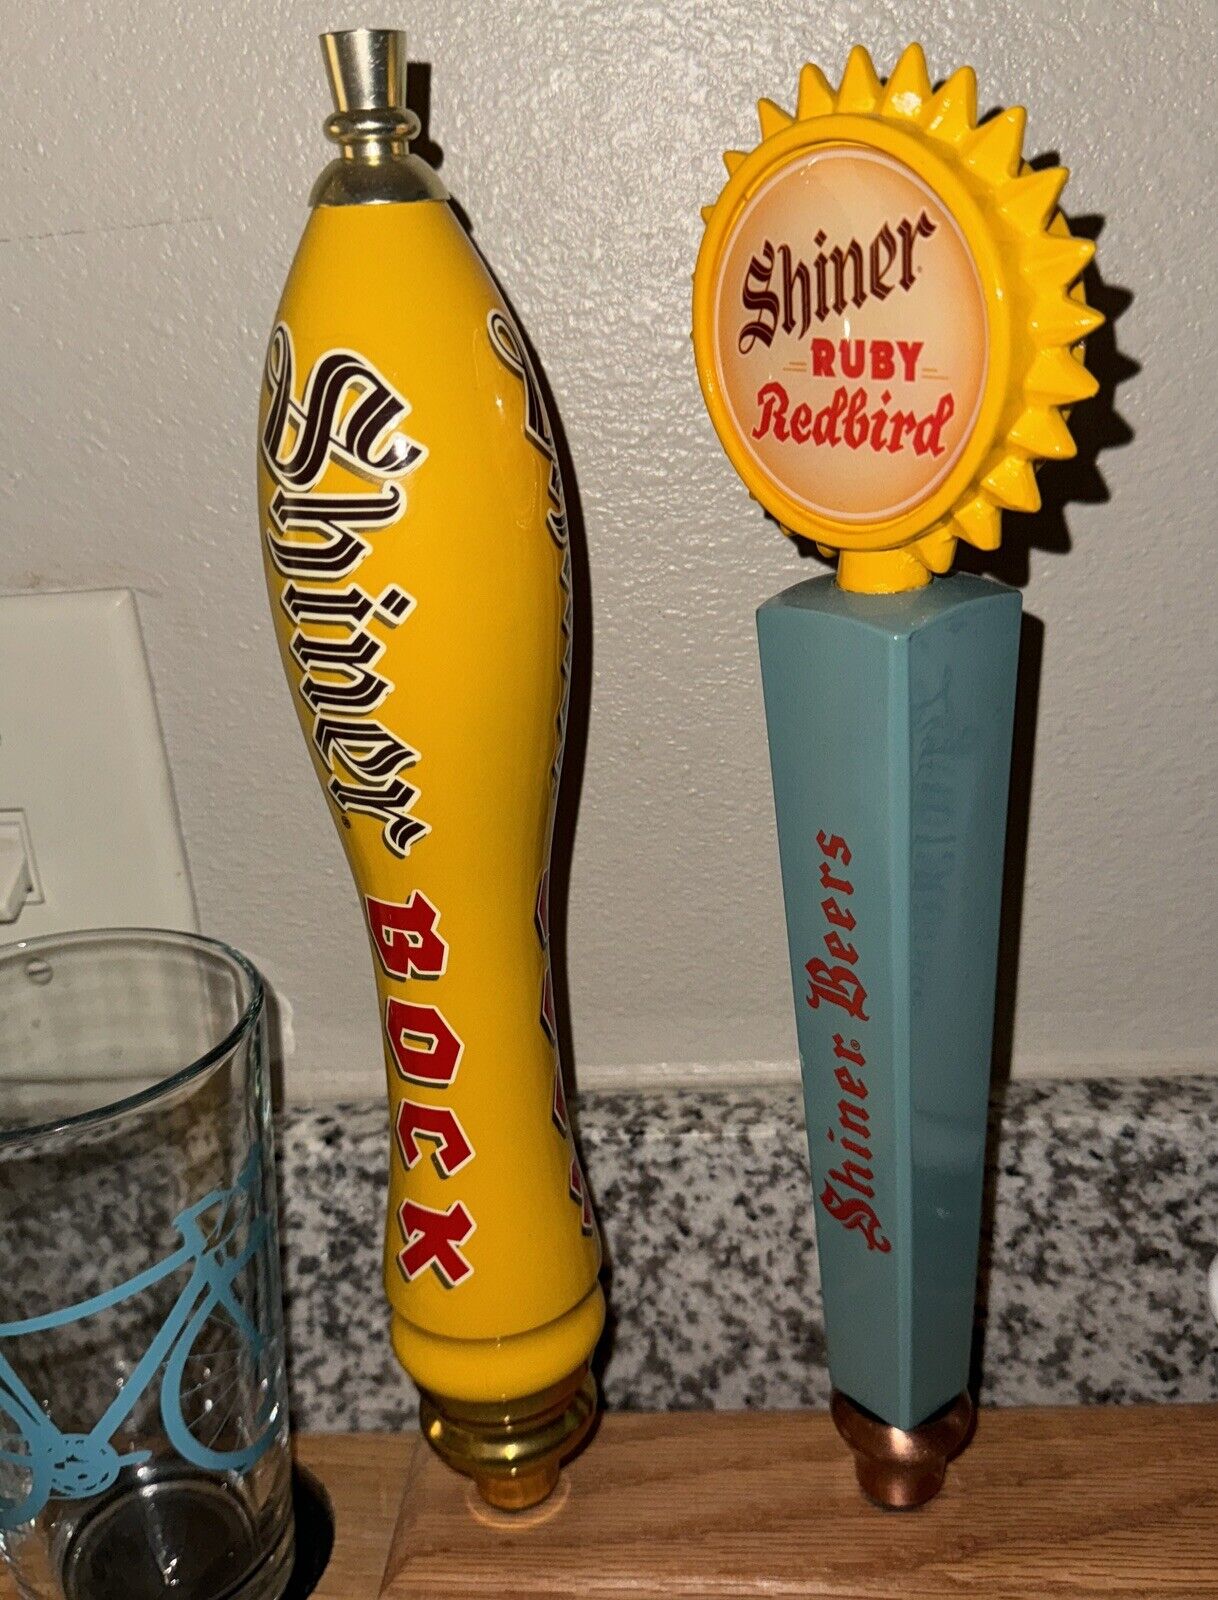 Shiner Bock Beer Tap And Ruby Red Bird Handle (1) Pick One Or Both For $100